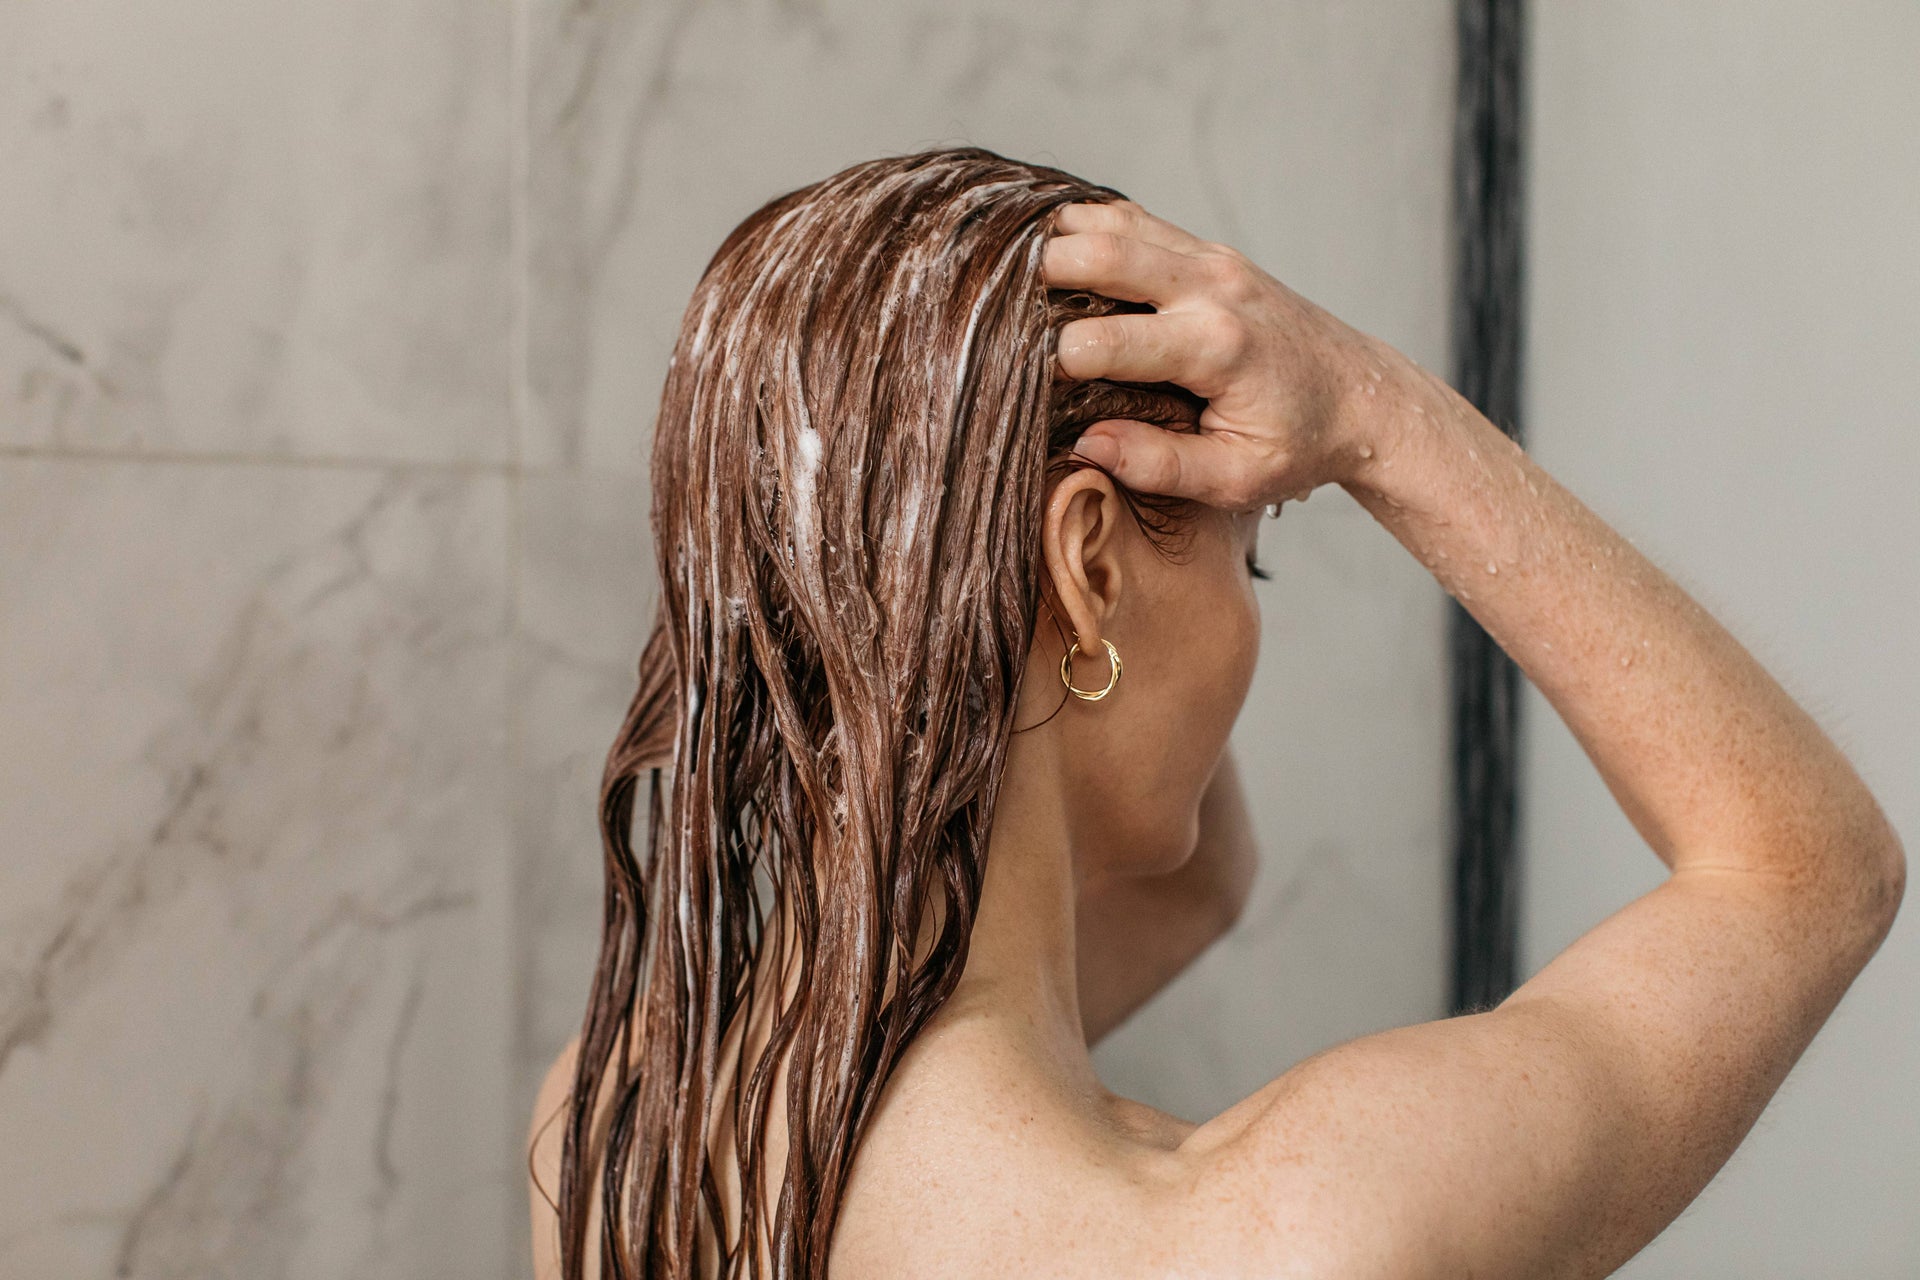 How To Actually Wash Your Hair According To A Trichologist